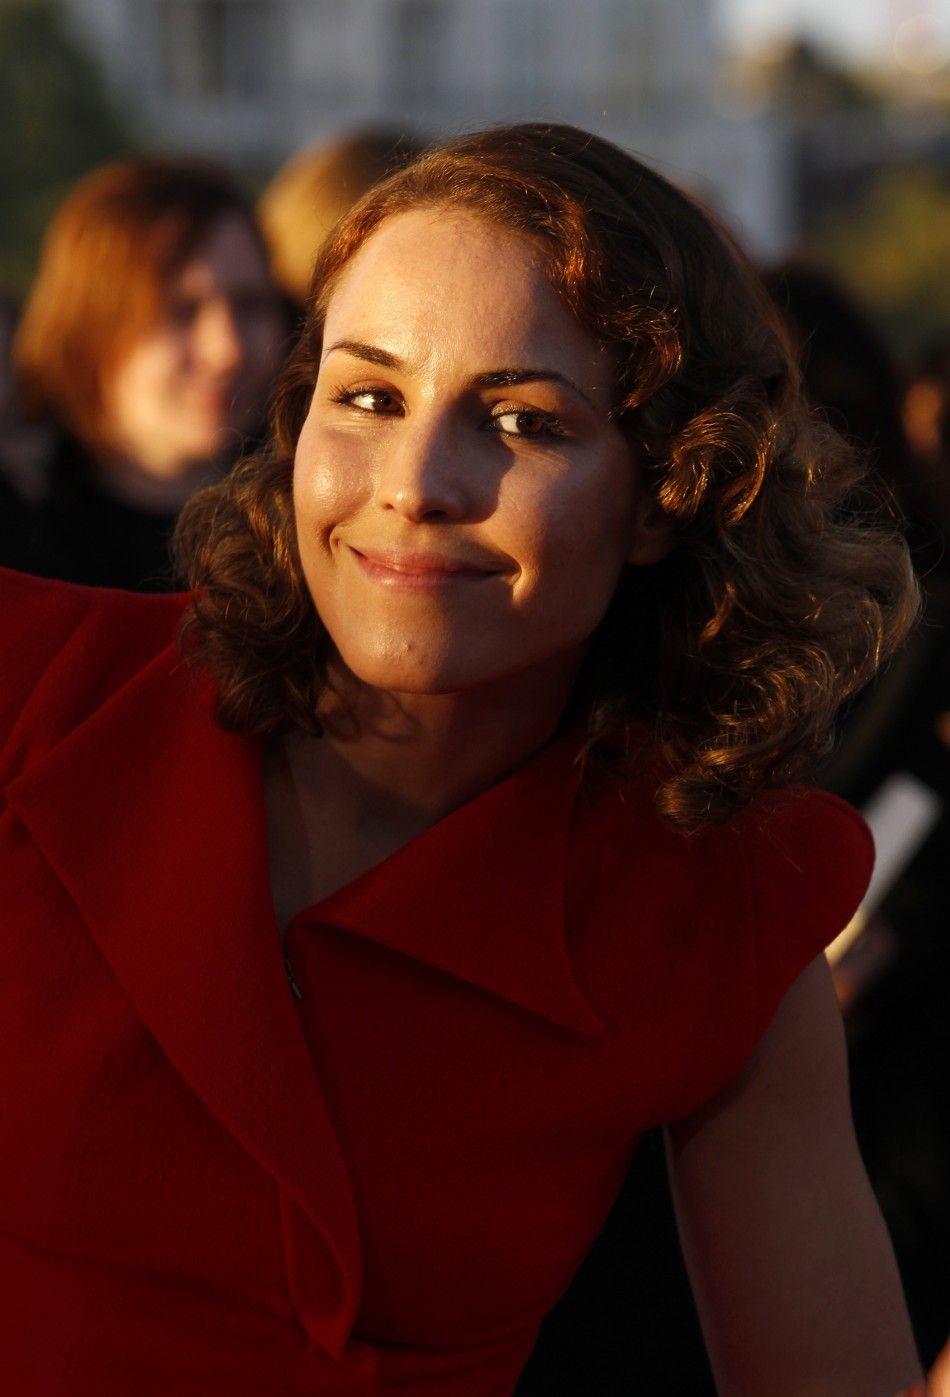 Swedish actress Noomi Rapace arrives for the UK premiere of Tinker Tailor Soldier Spy in London